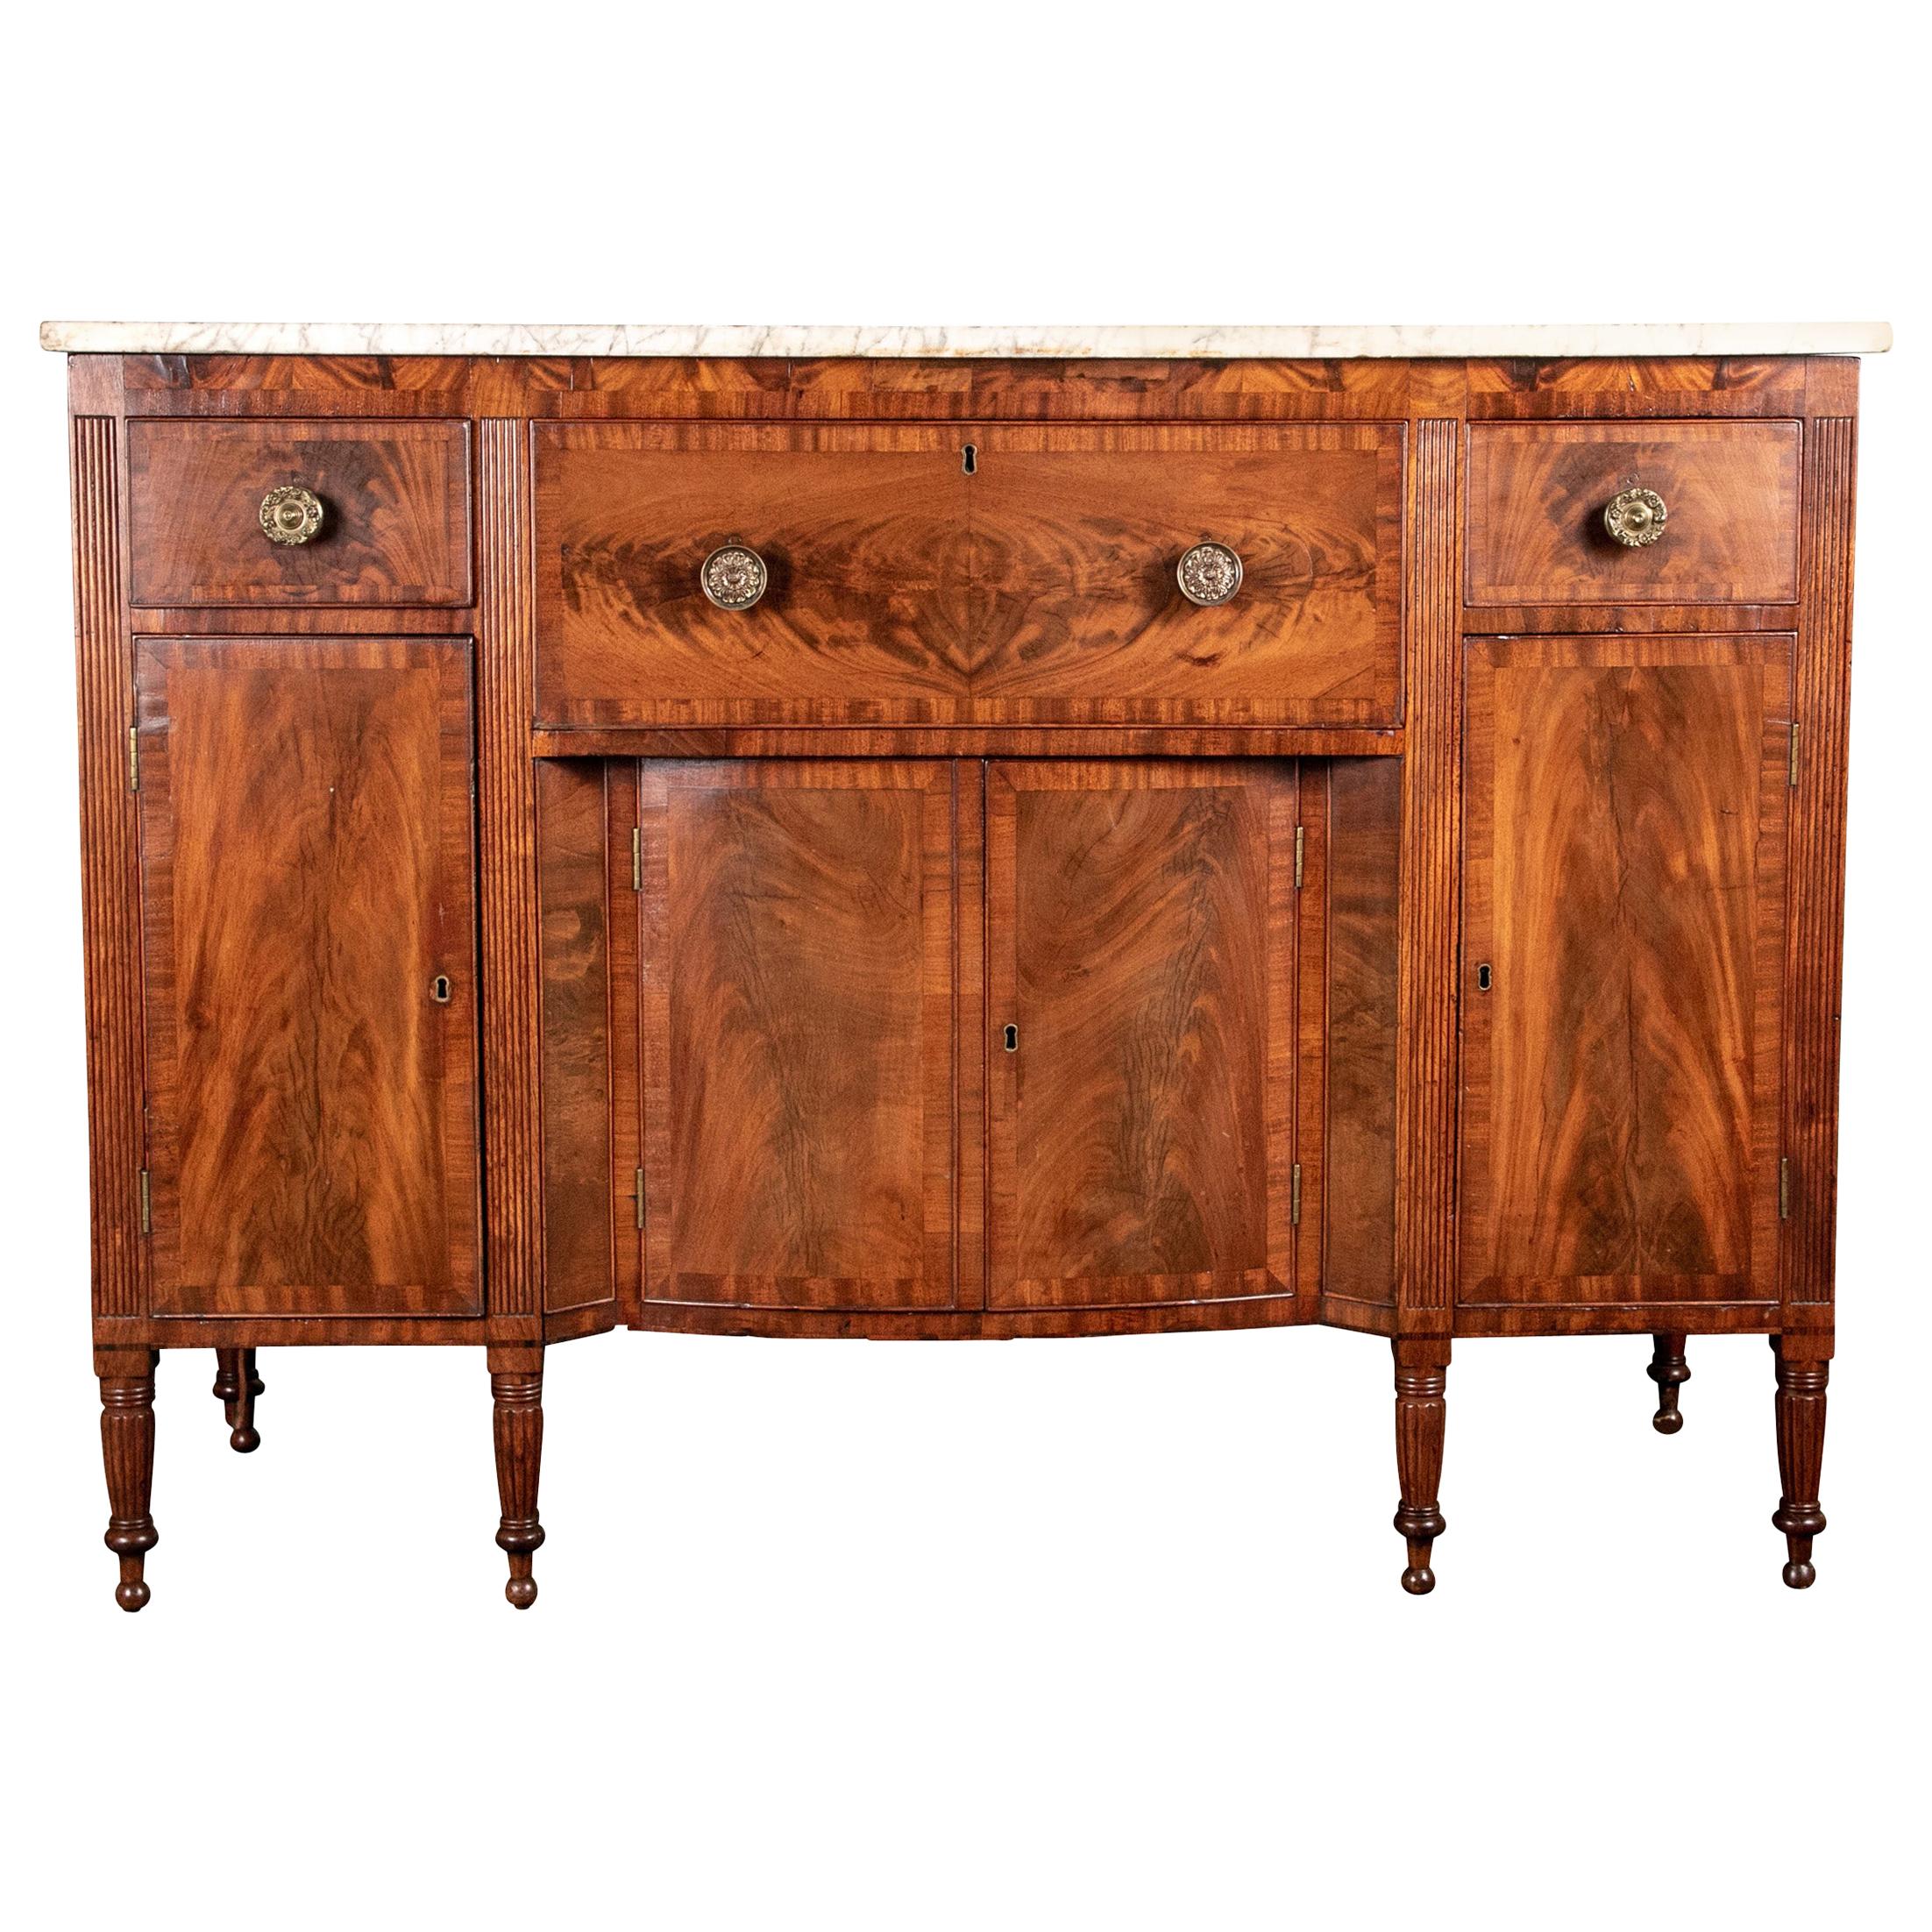 Rare Antique New York Sideboard/ Desk in Banded Mahogany and Original Condition